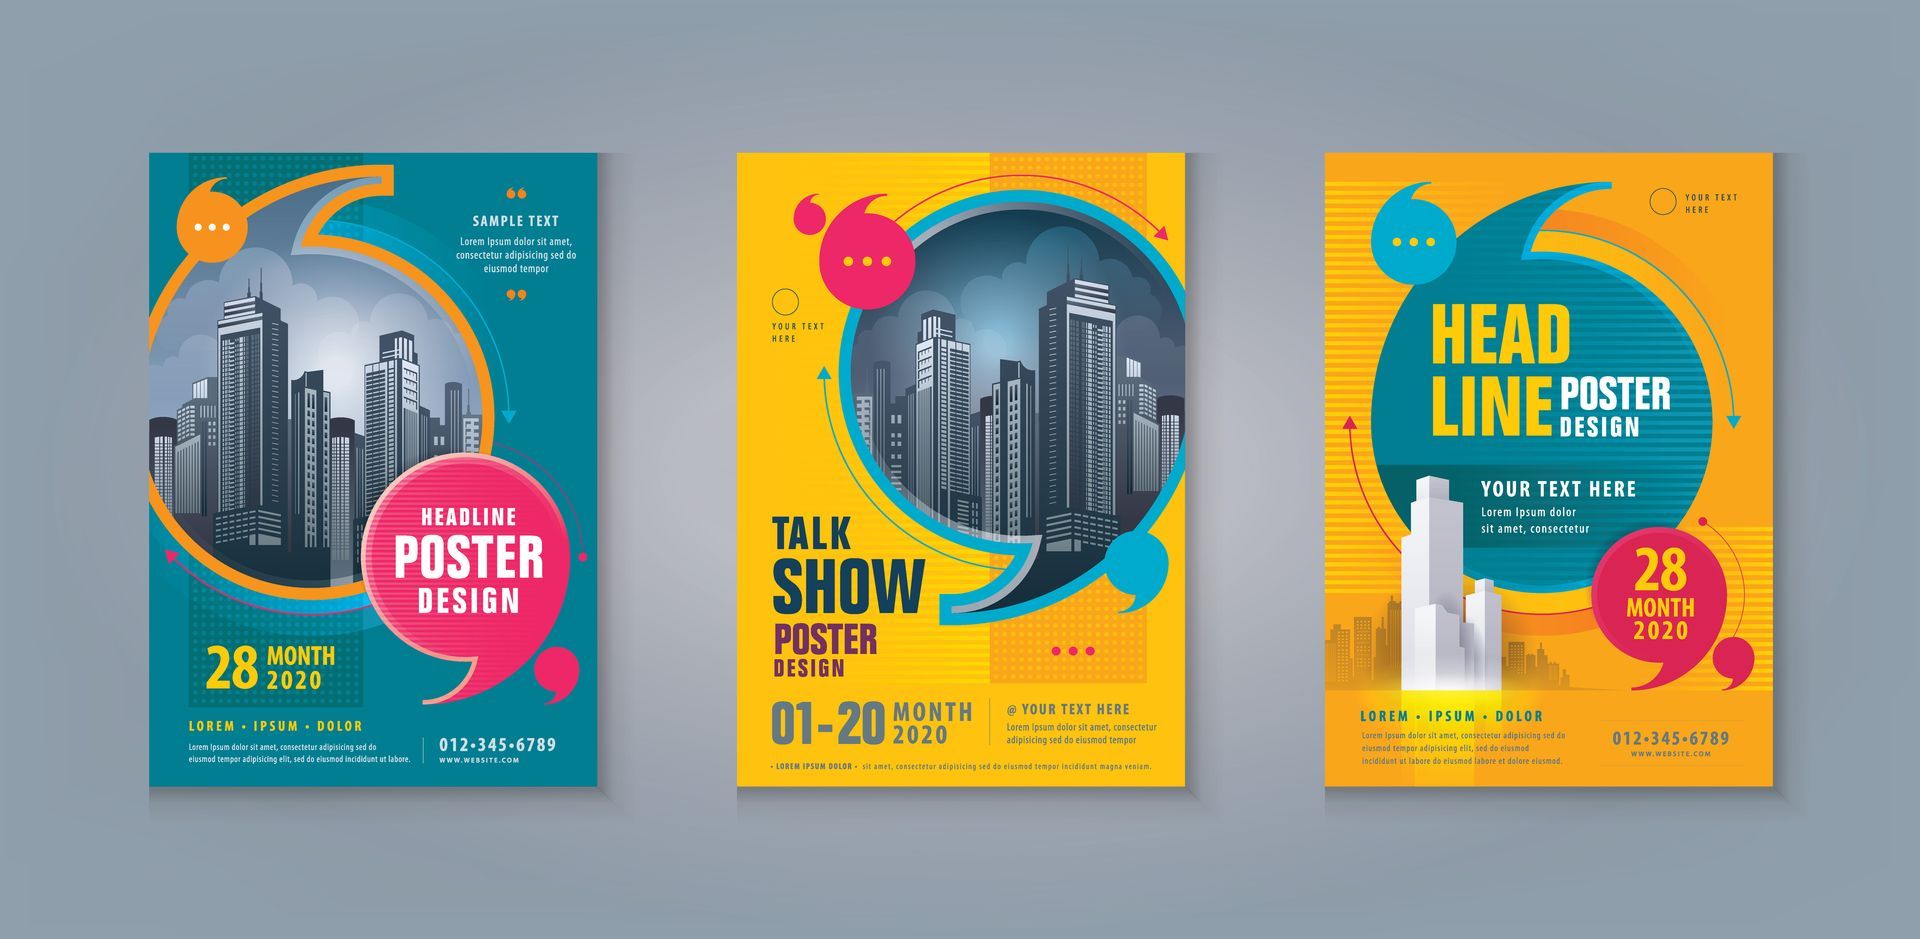 Orange Custom Posters For Conferences & Trade Shows